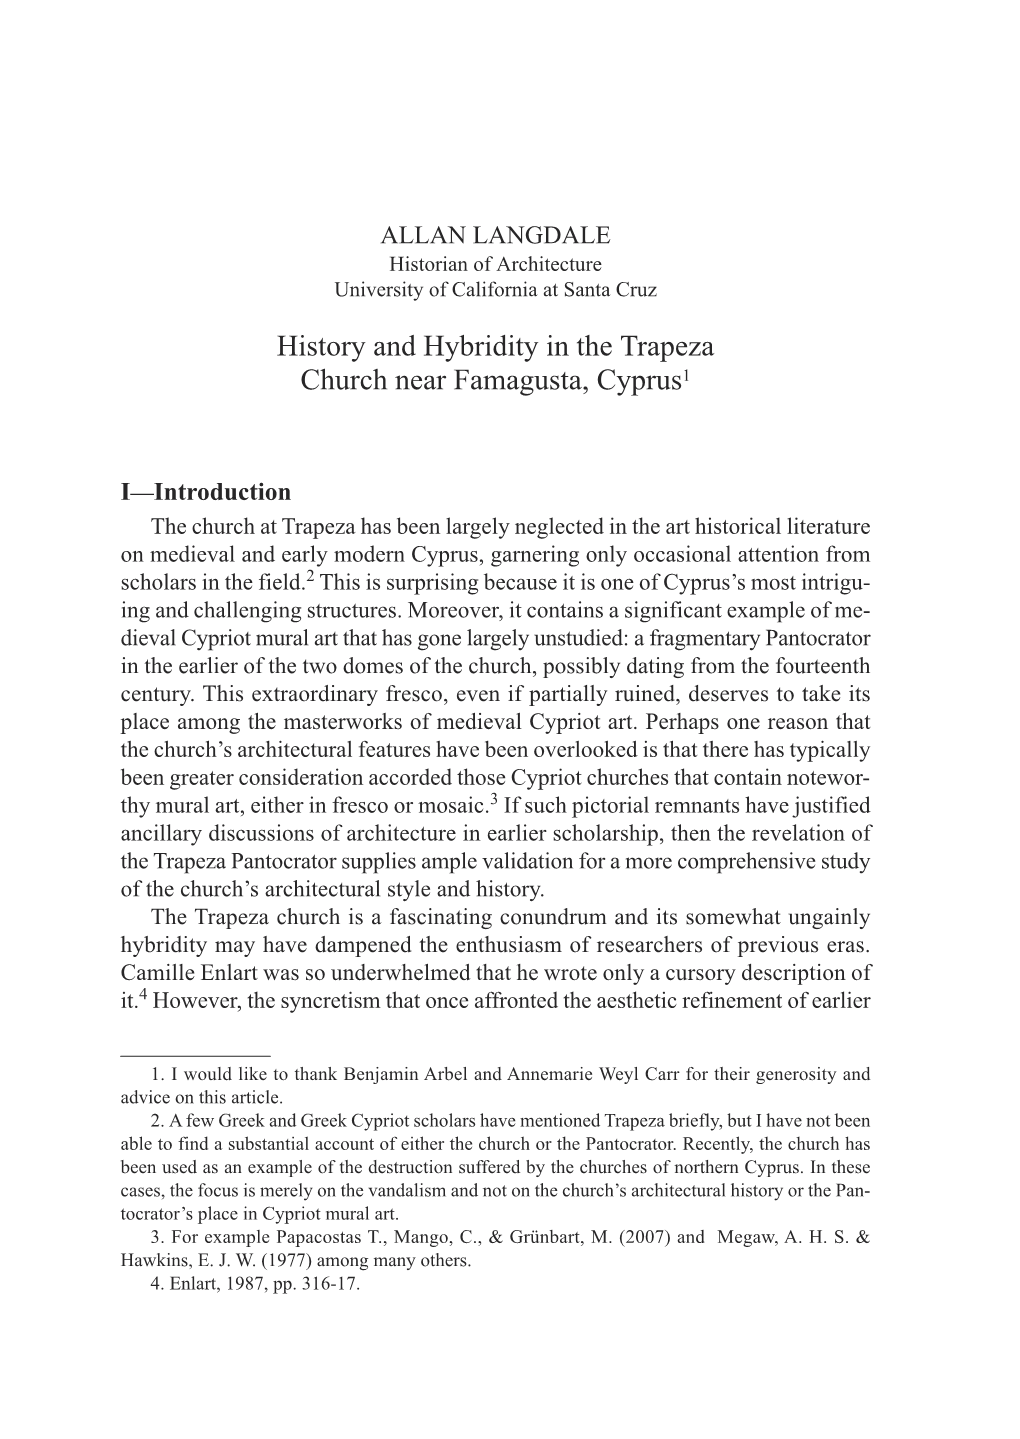 History and Hybridity in the Trapeza Church Near Famagusta, Cyprus 1